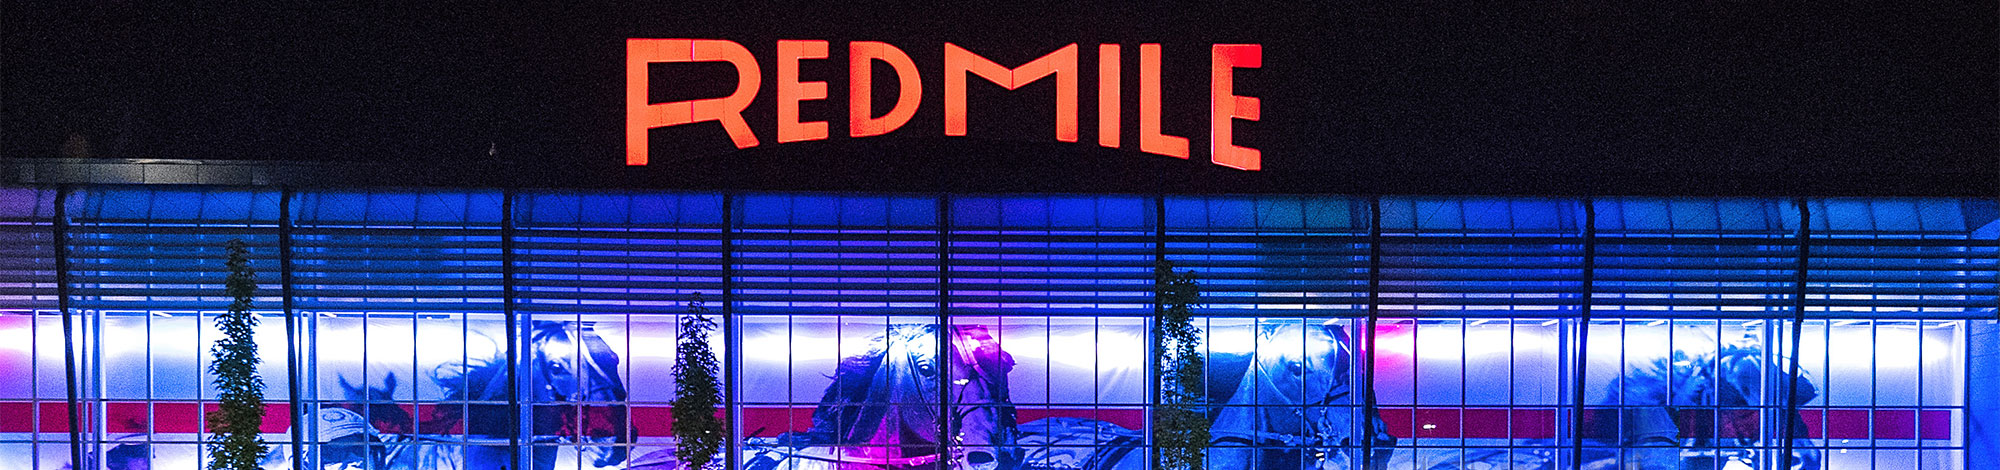 Photo of the Red Mile property at night